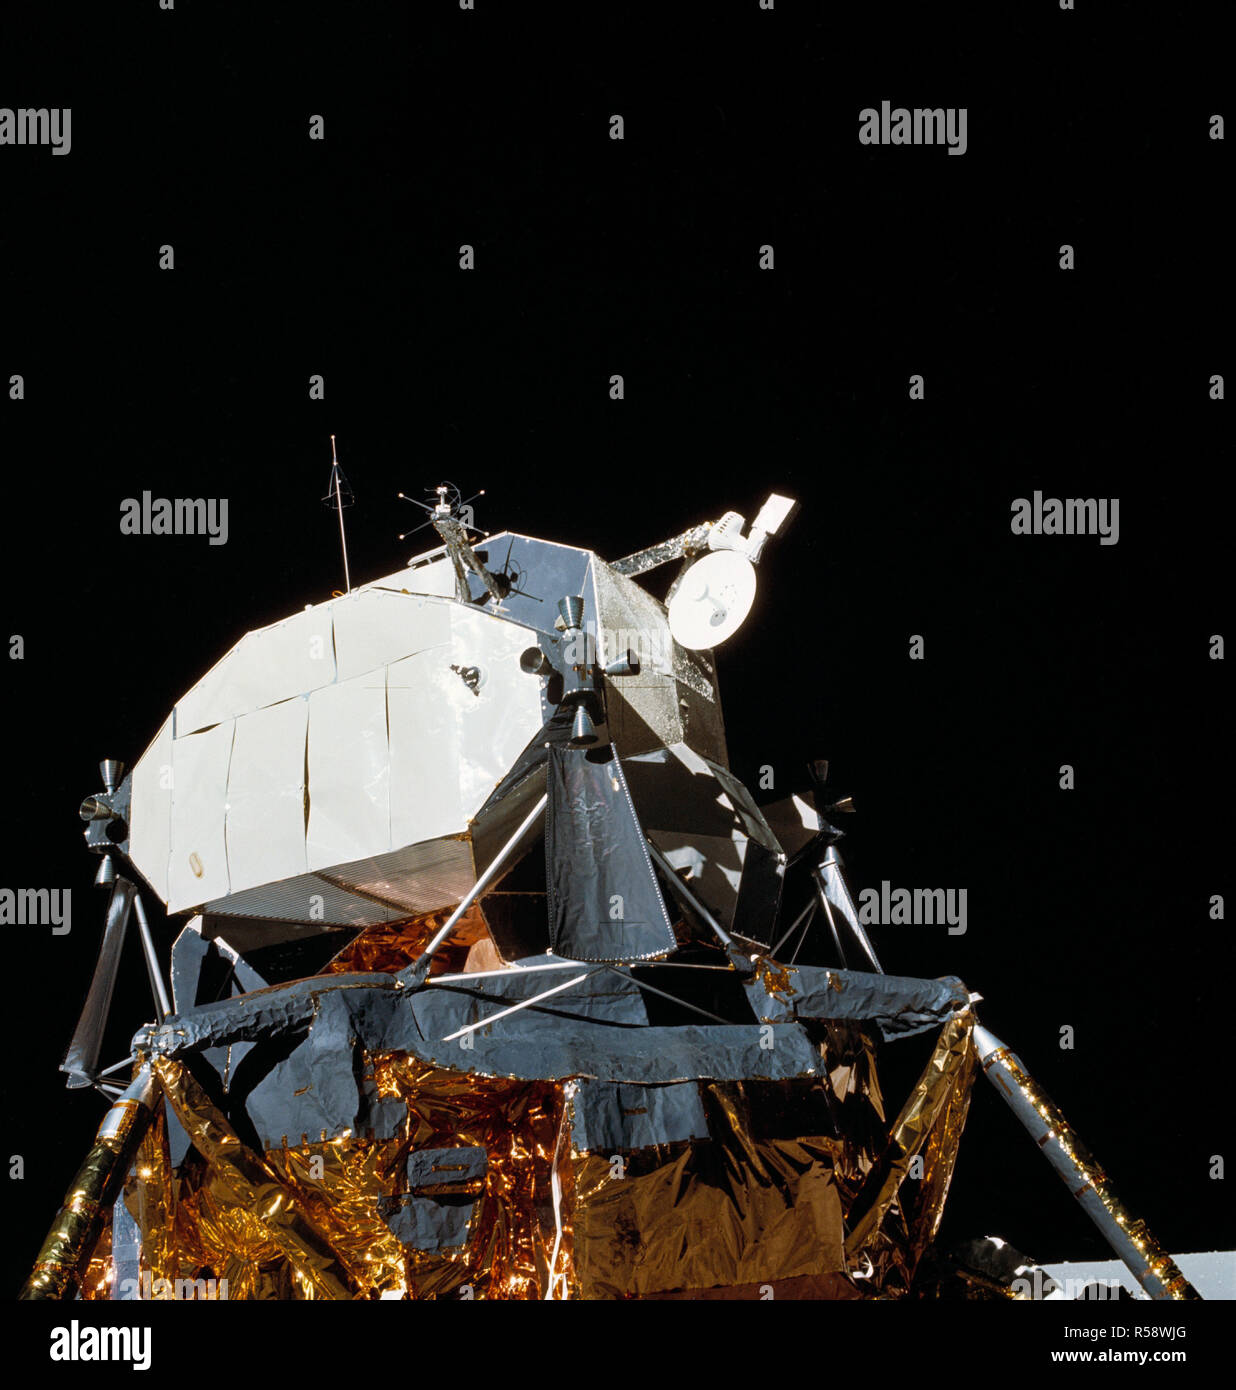 (21 April 1972) --- View of the Lunar Module (LM) 'Orion' parked on the lunar surface. During their post mission press conference, the Apollo 16 crewmembers called attention to the steerable S-band antenna, which was 'frozen' in a yaw axis during much of the flight. Stock Photo